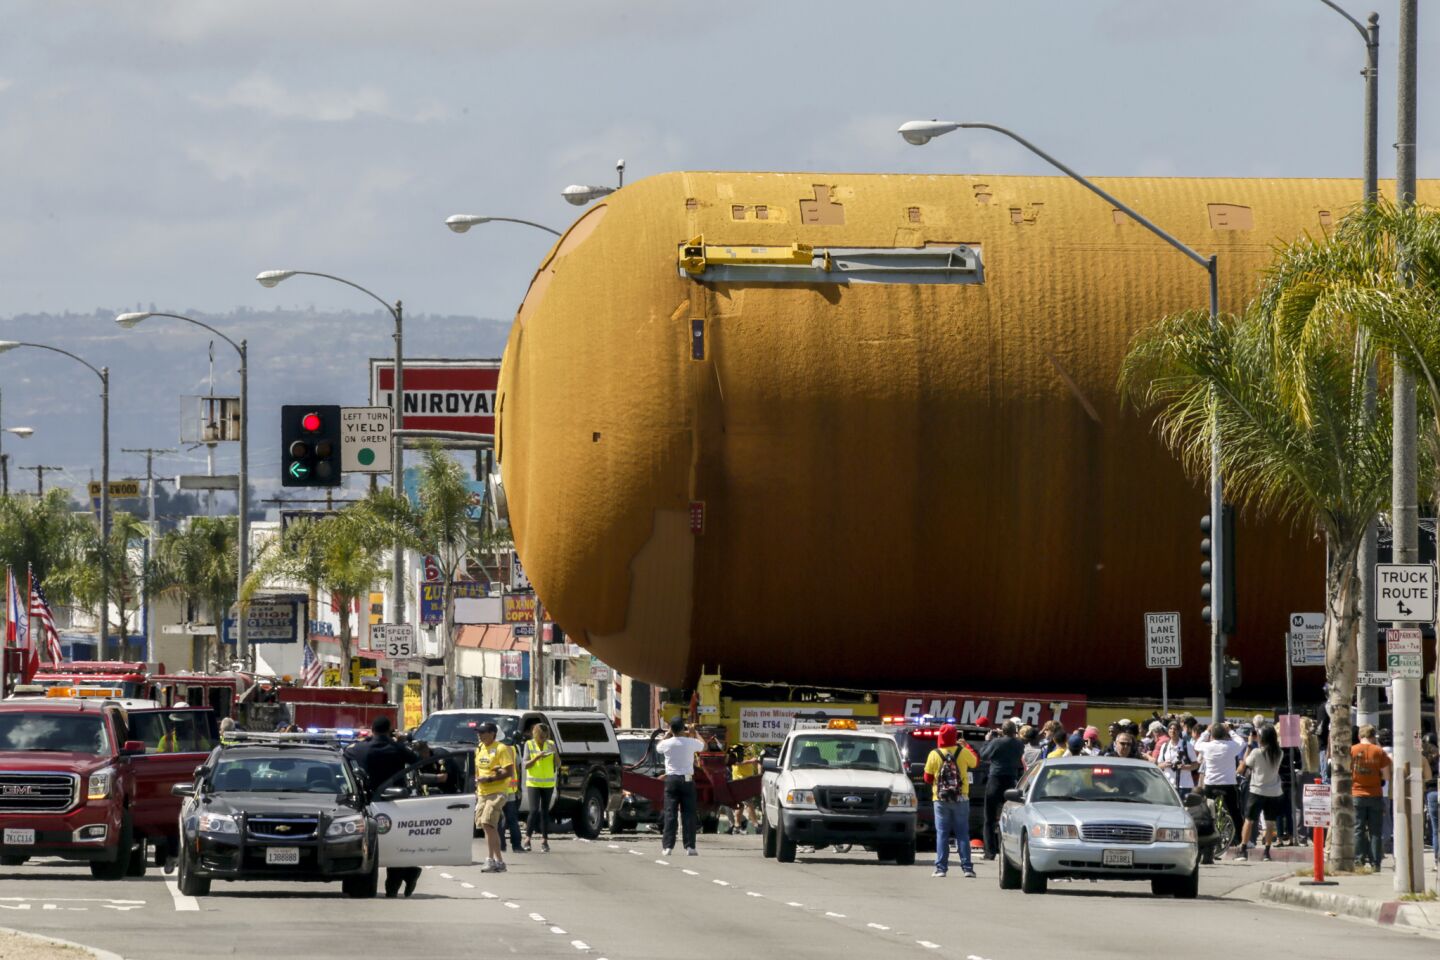 ET-94, NASA's last remaining space shuttle external tank, enters La Brea Avenue from Arbor Vitae Street in Inglewood on its way to the California Science Center on Saturday.